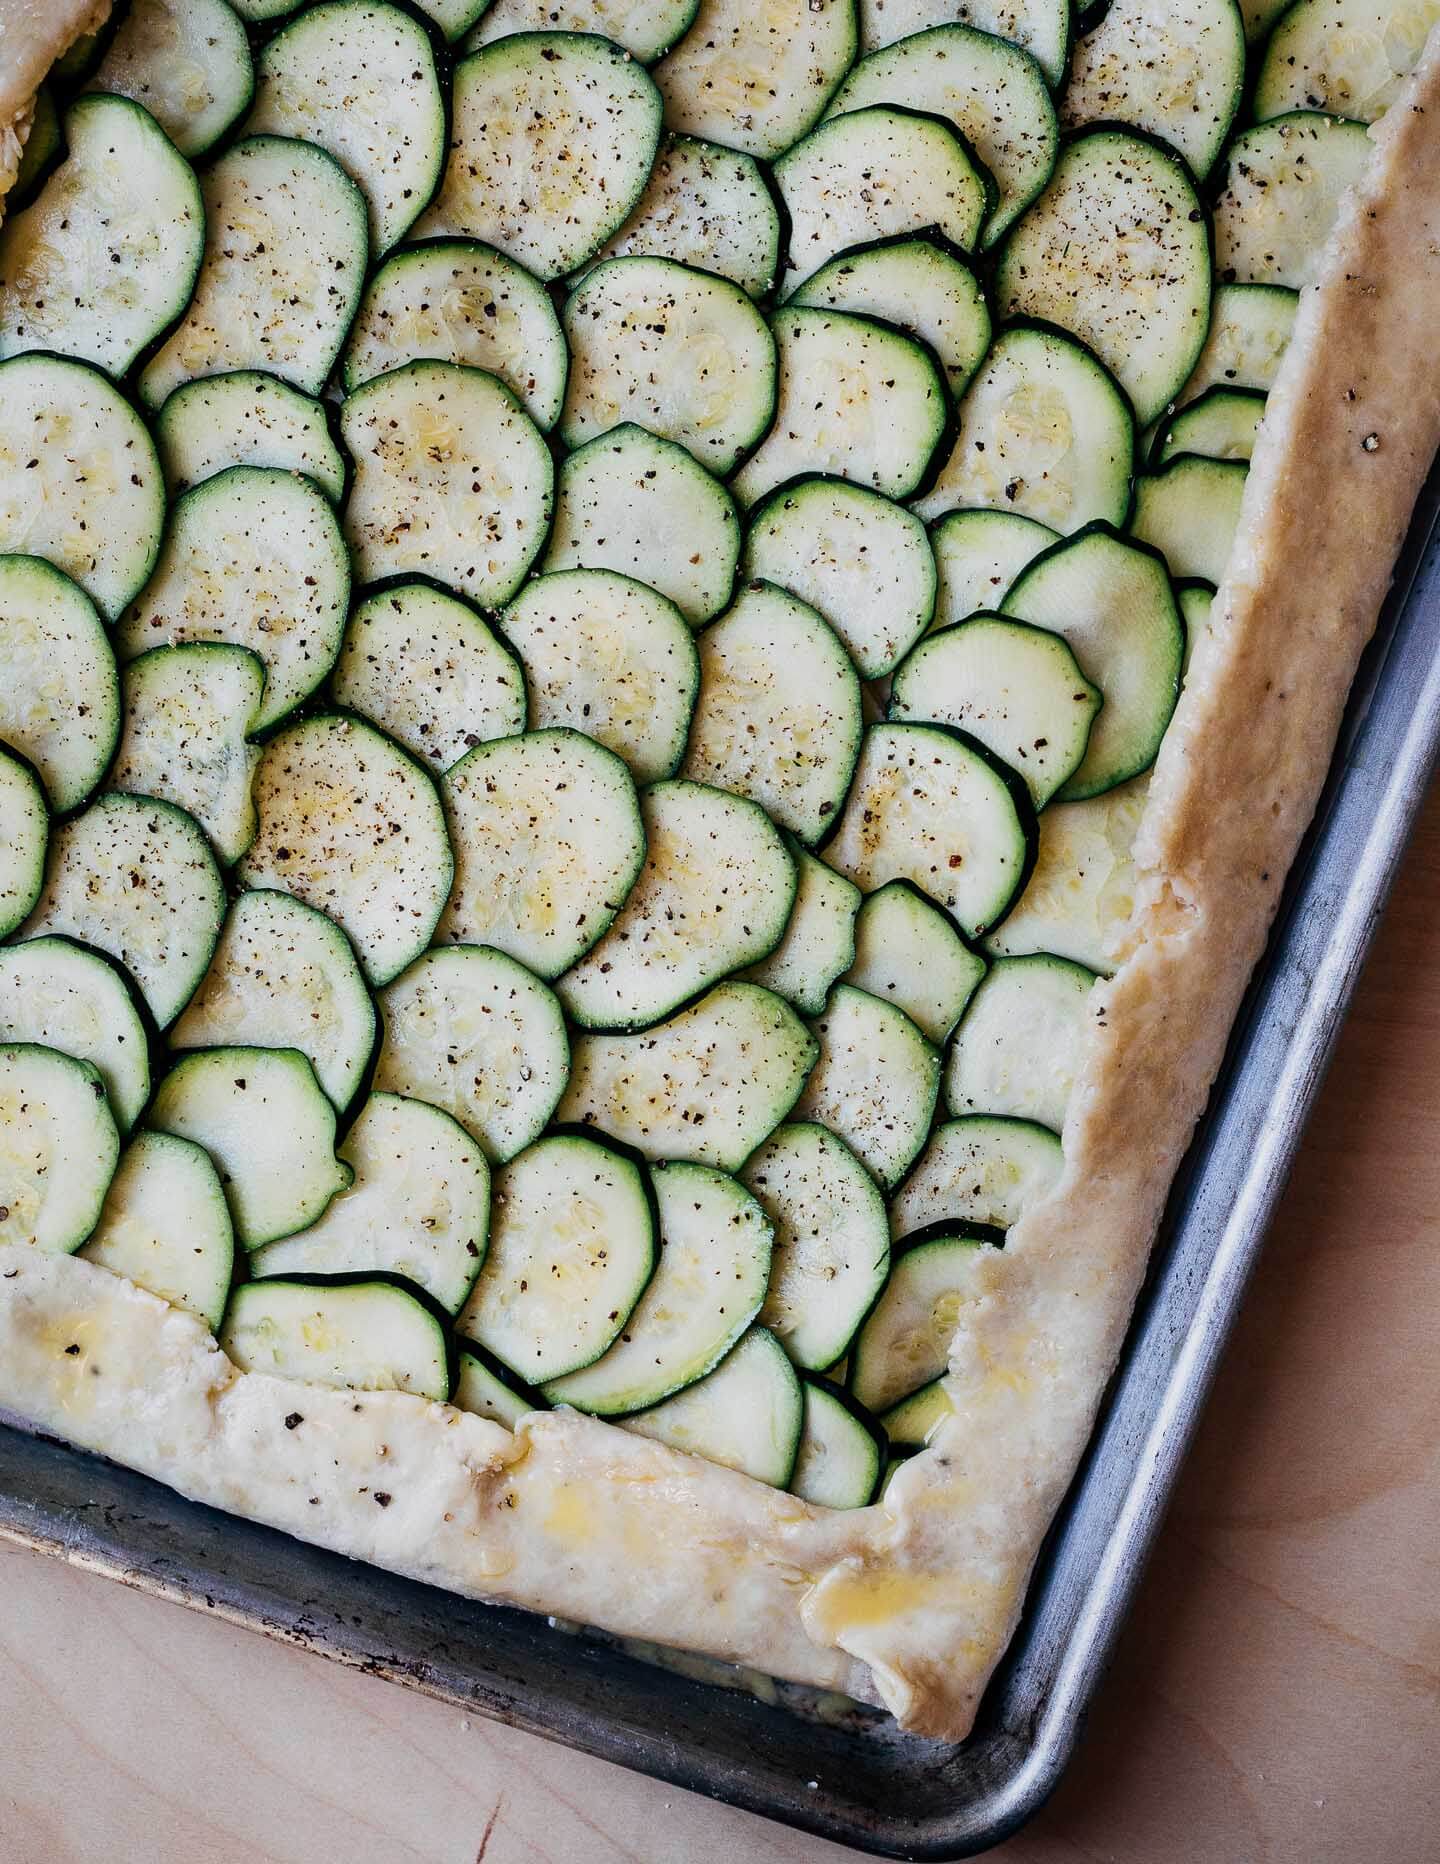 A zucchini tart, prepped and ready to bake.